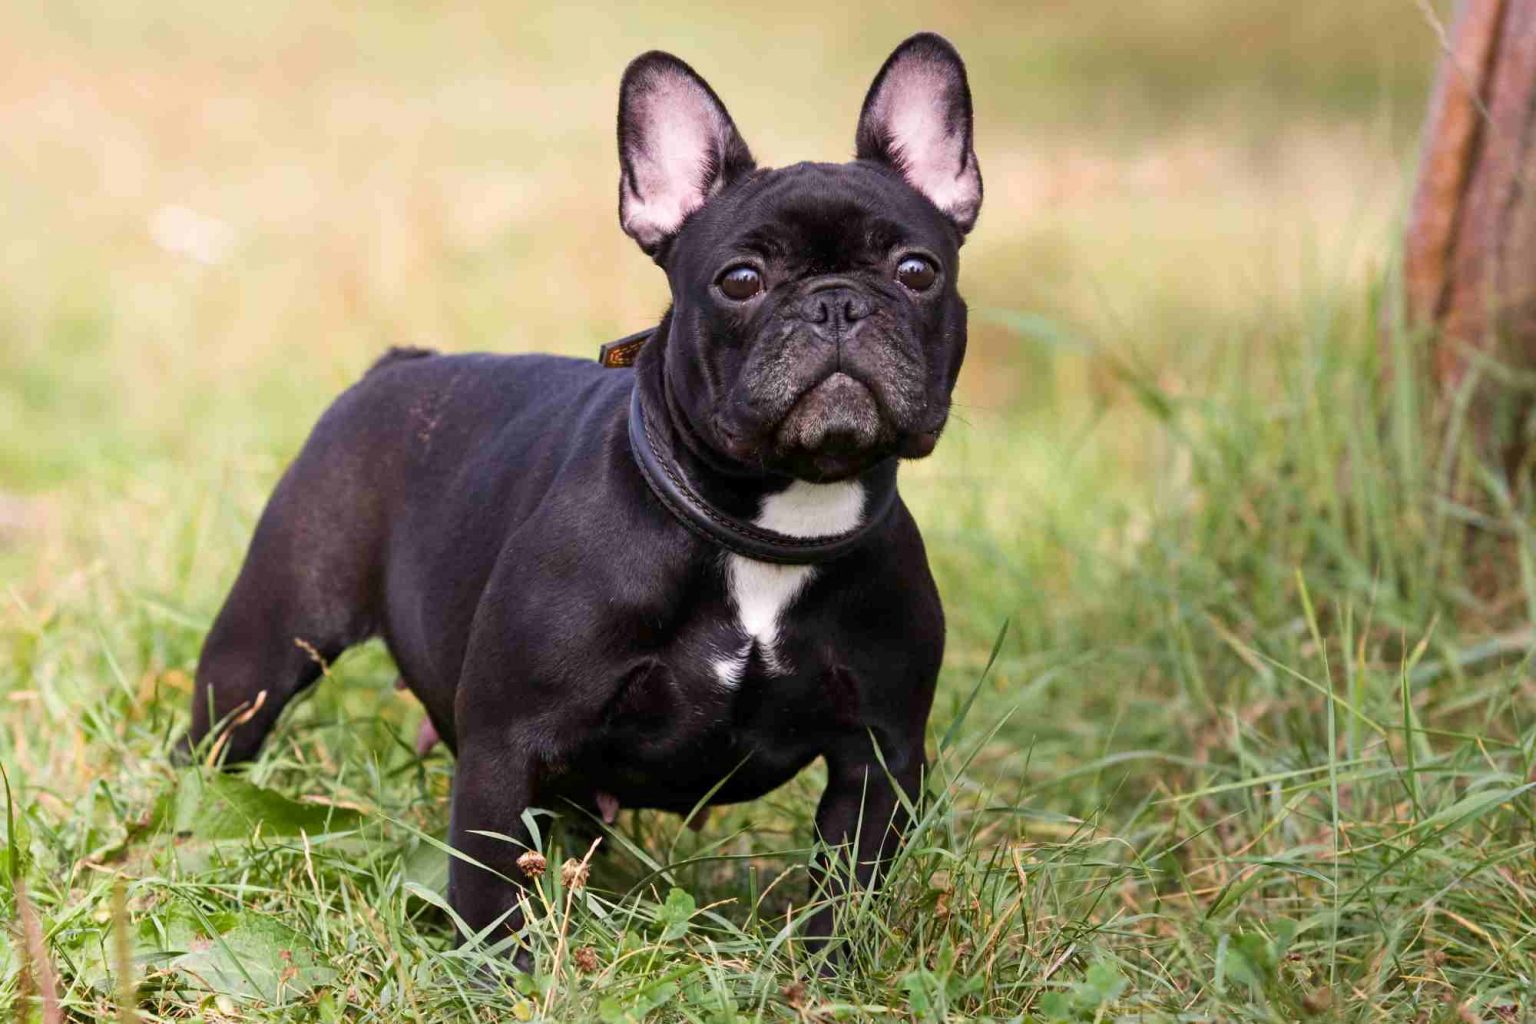 Top 10 Small Dog Breeds in Australia - the most popular small dogs